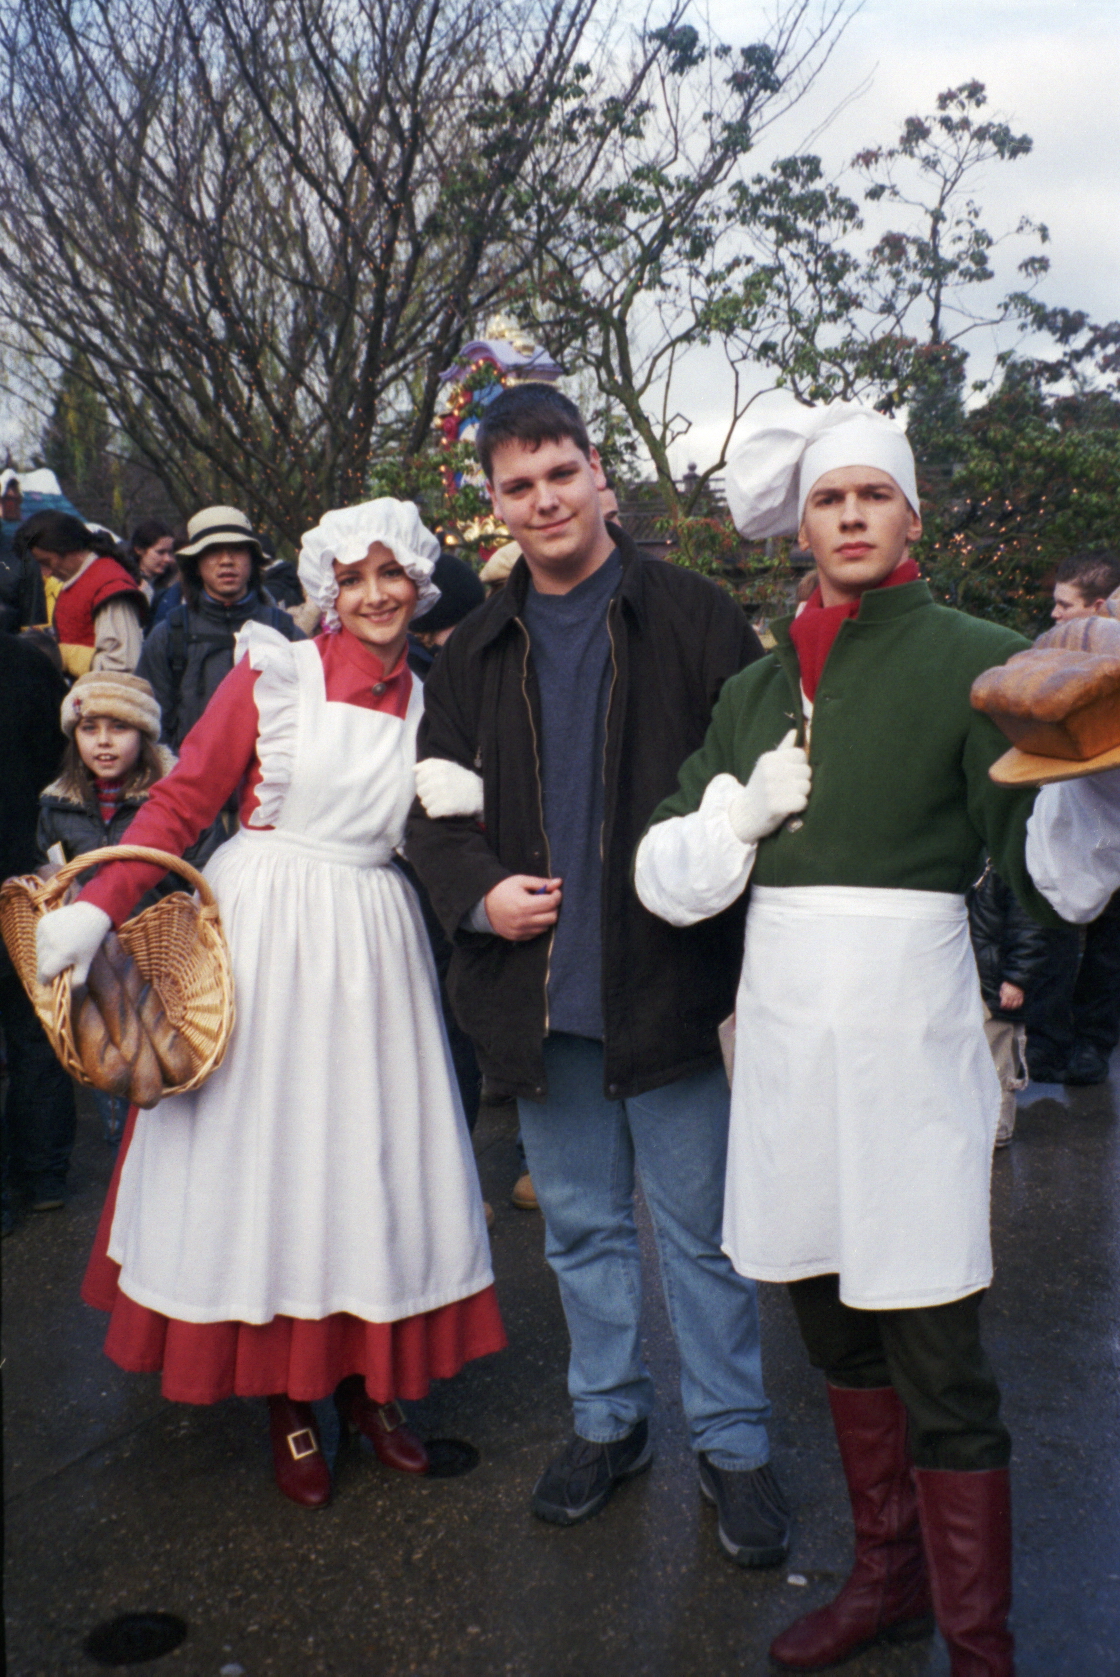 During Christmas Season 2002/2003 and 2003/2004 a small show was held in Belle's Village in Fantasyland. The show featured Belle, Gaston and a couple of the village people including the Baker and his wife. After each show they would do Meet'n'Greets with guests.